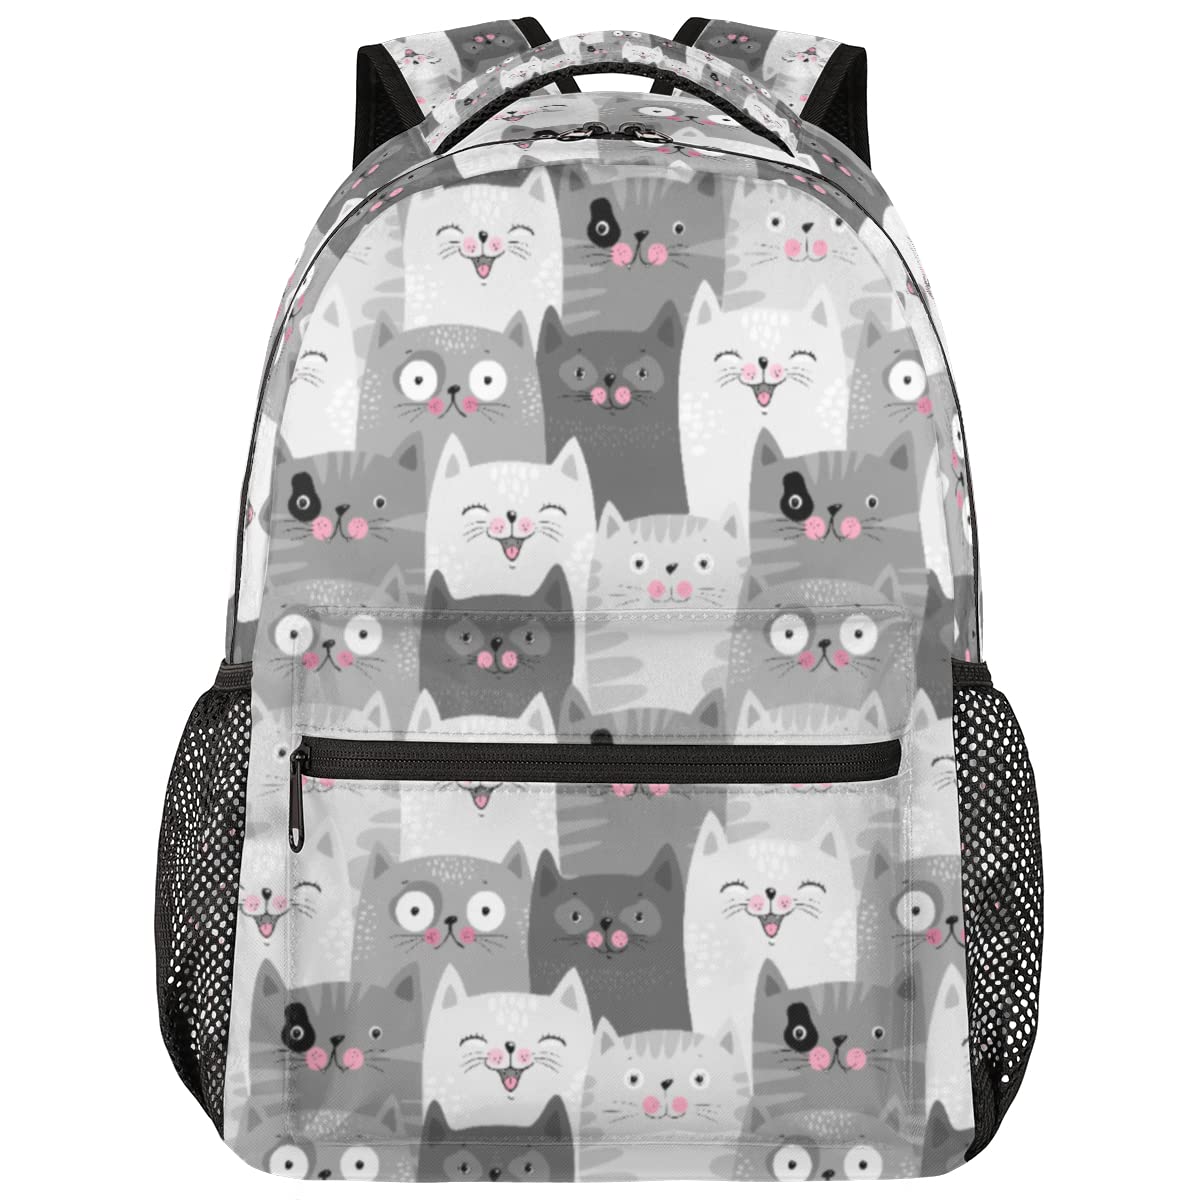 Cat Backpack for Boys Girls, Cute Animal Cats Kids School Backpacks Laptop Backpack Water Resistant Casual Hiking Camping Travel Daypack Lightweight Bookbag for Student with Adjustable Buckles